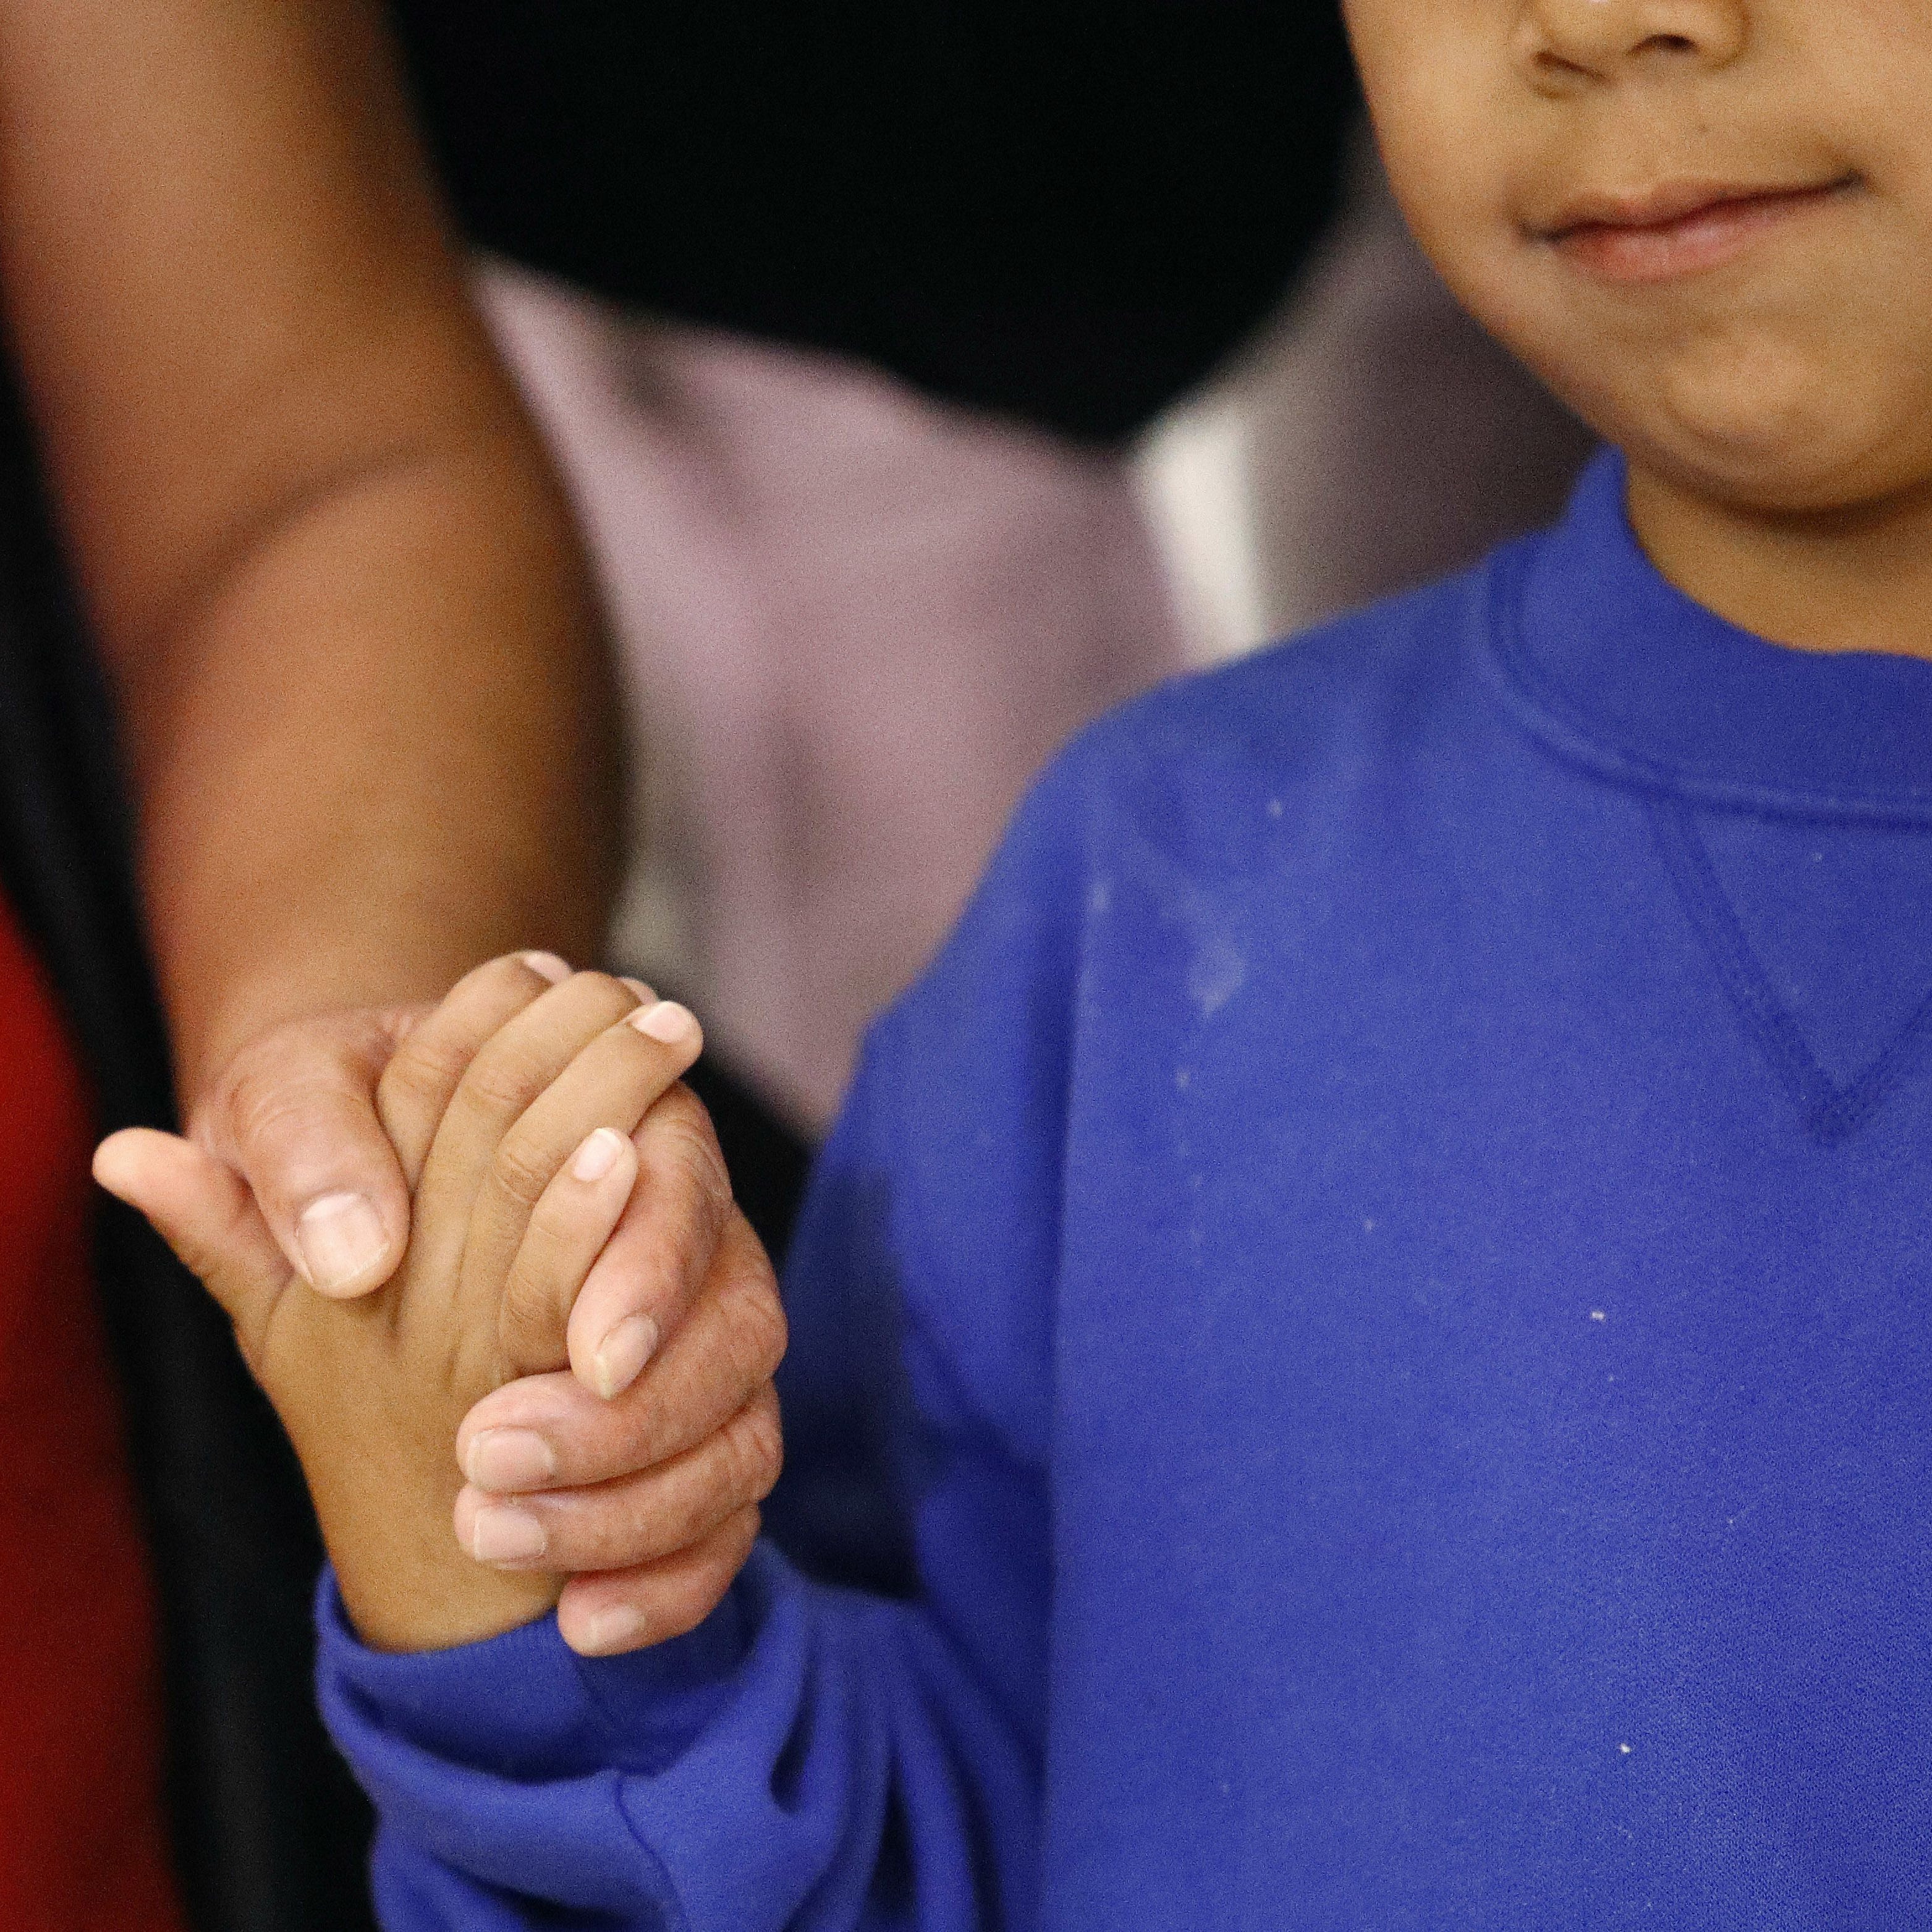 A mother and son from Guatemala hold hands during a news conference June 22, 2018, following their reunion in Linthicum, Md., after being separated at the U.S. border.